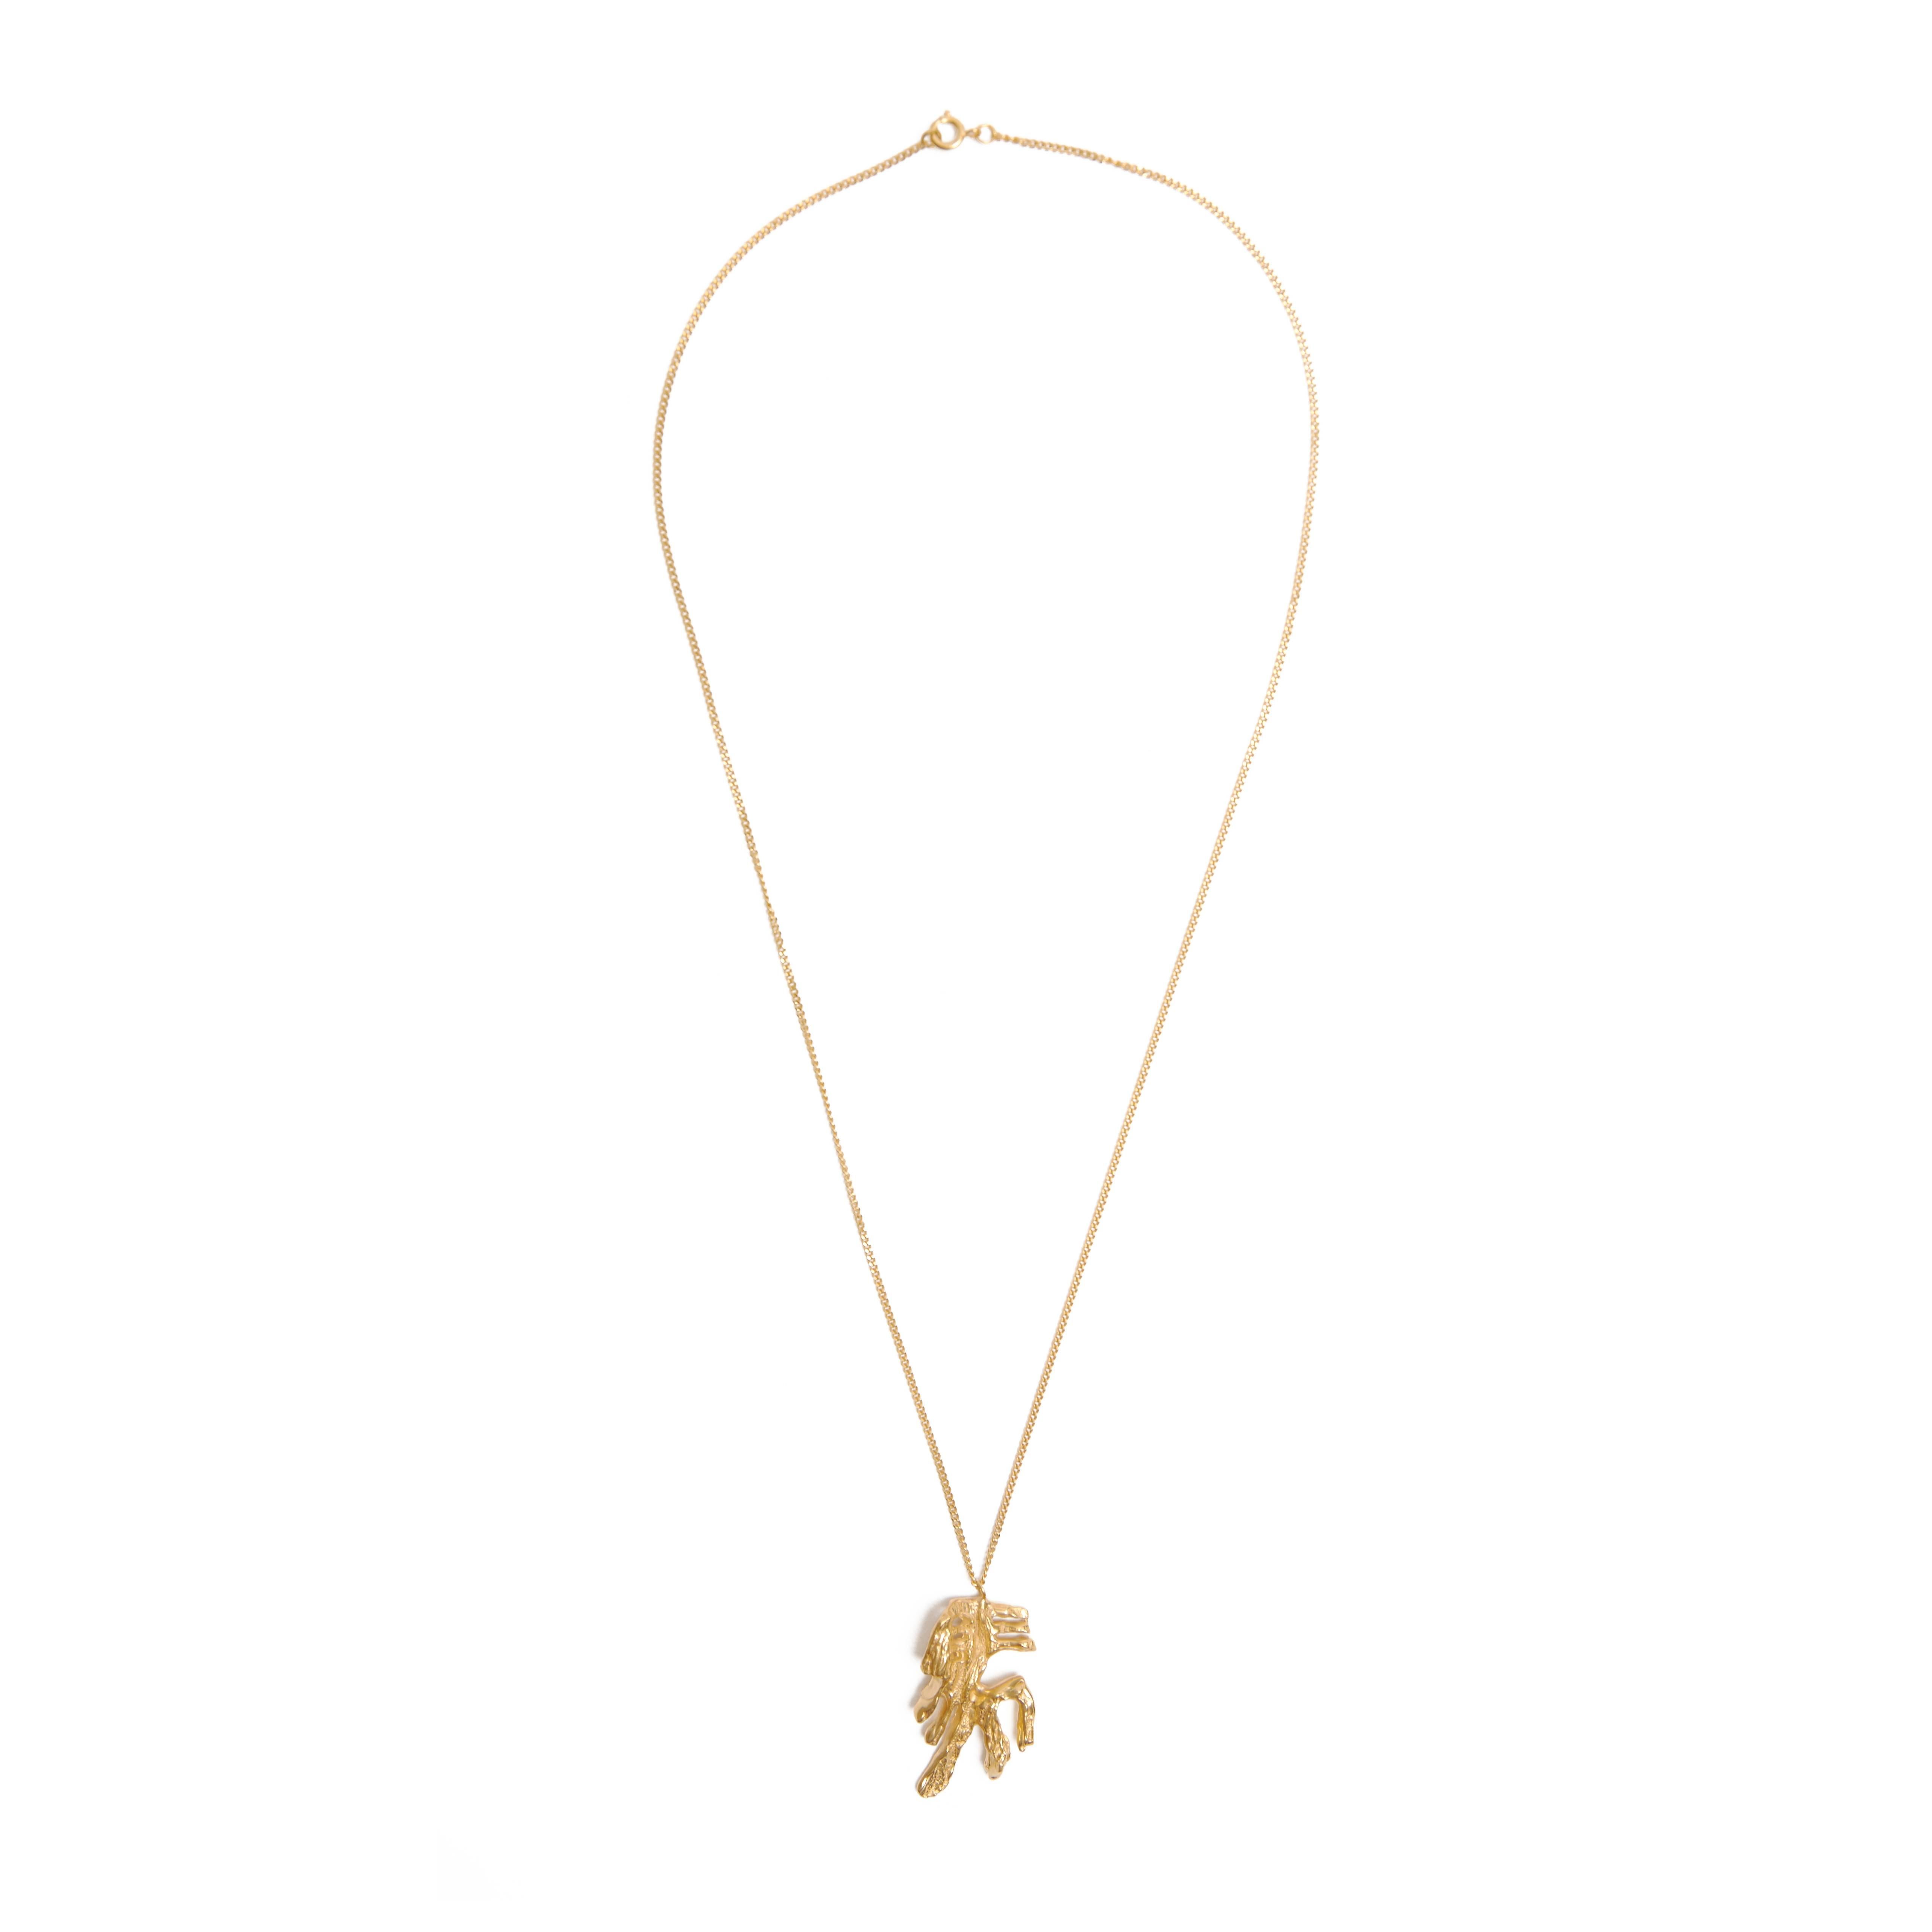 The Chinese zodiac Horse necklace is inspired by the ancient Chinese calligraphy character of Horse (Ma 马), the seventh of the twelve signs of the Chinese zodiac. People born in the year of the Horse are filled with energy and spirit, and are always